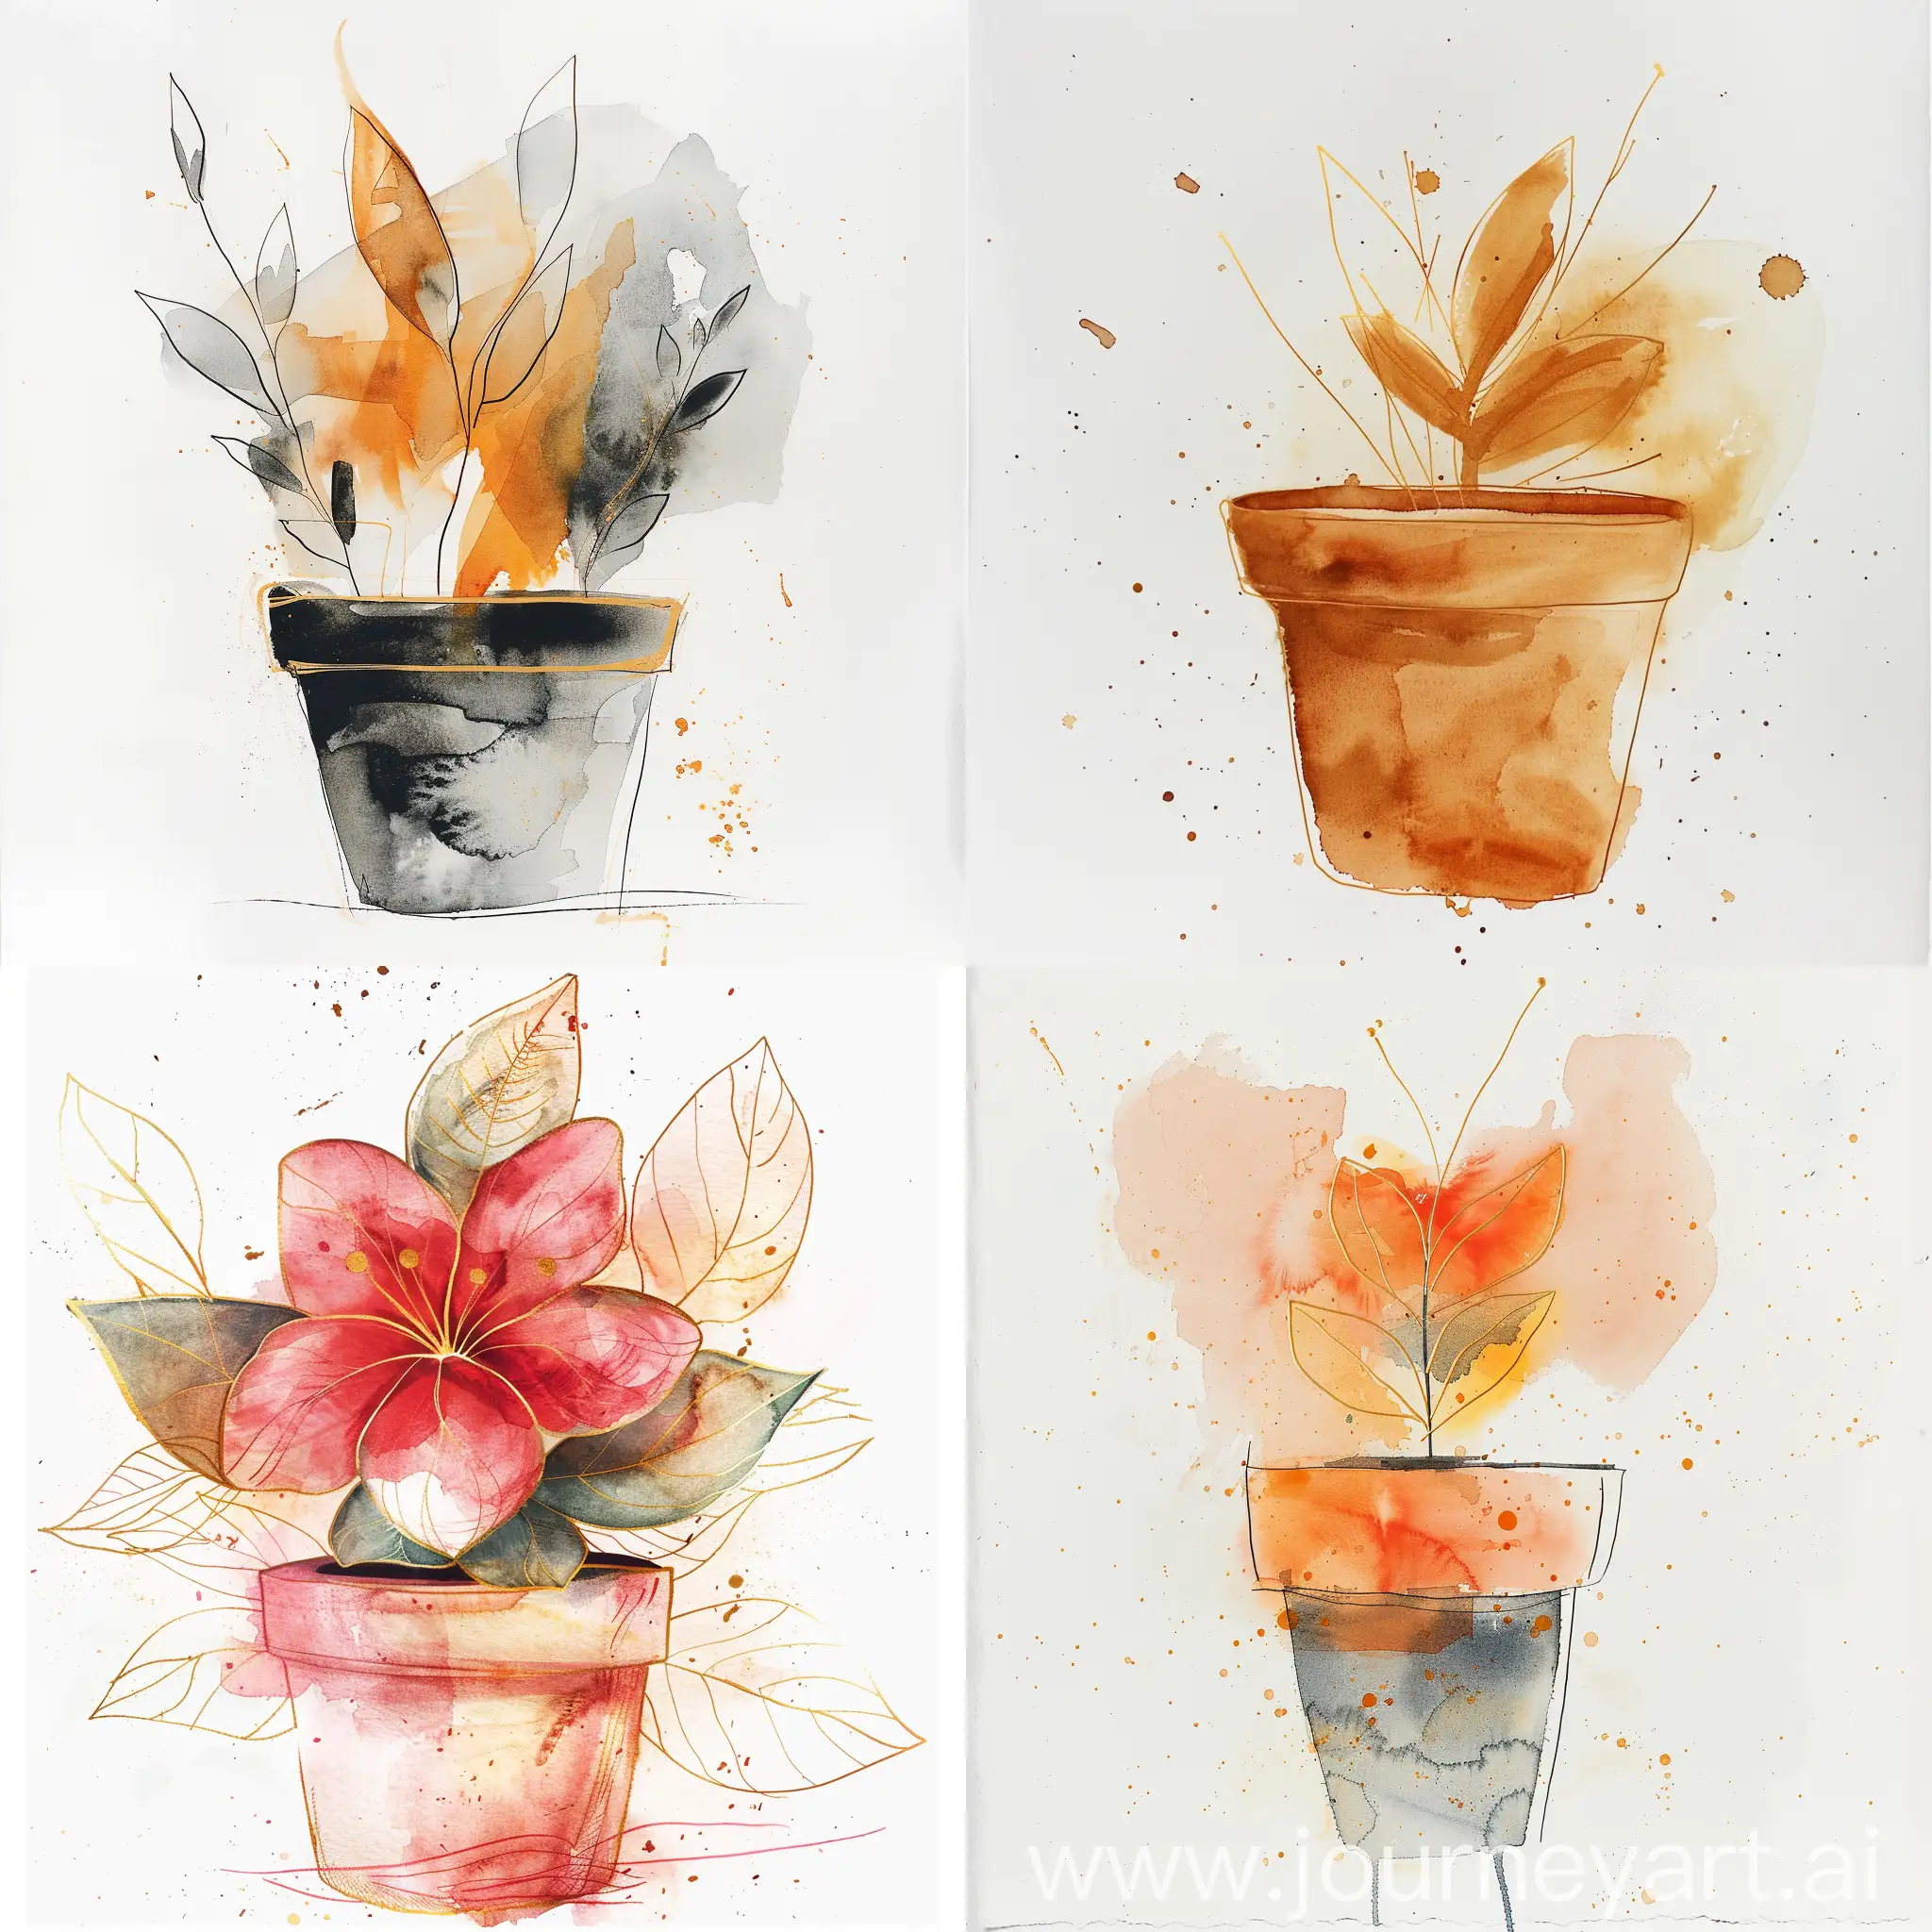 Watercolor technique on white background, flower pot in Eelke jelles elkema style, very beautiful golden lines are used in the painting.